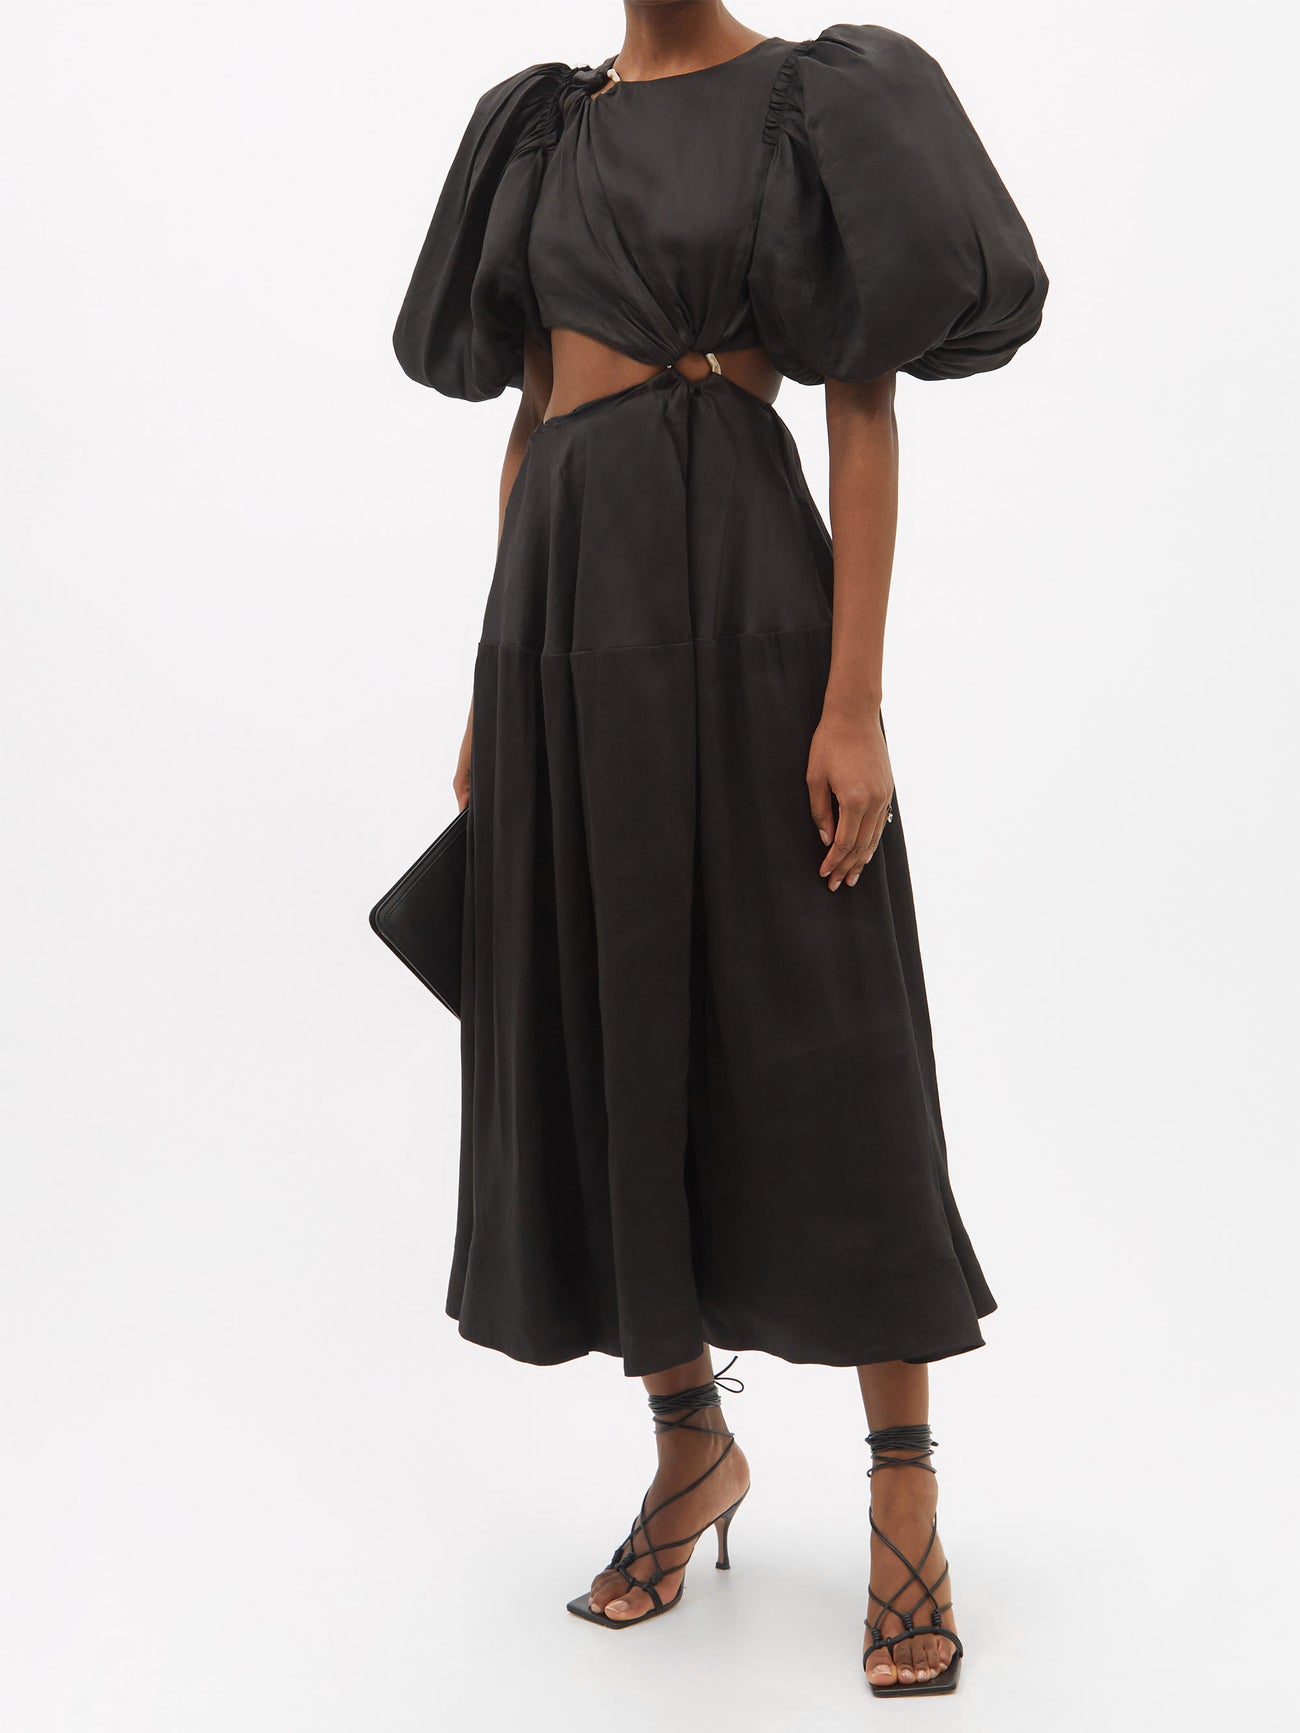 Aje’s black linen-blend midi length dress features short, puffed sleeves and a cutout centre linked with a gold ring at the waist. Round neck with matching smaller gold ring at the collar bone. 